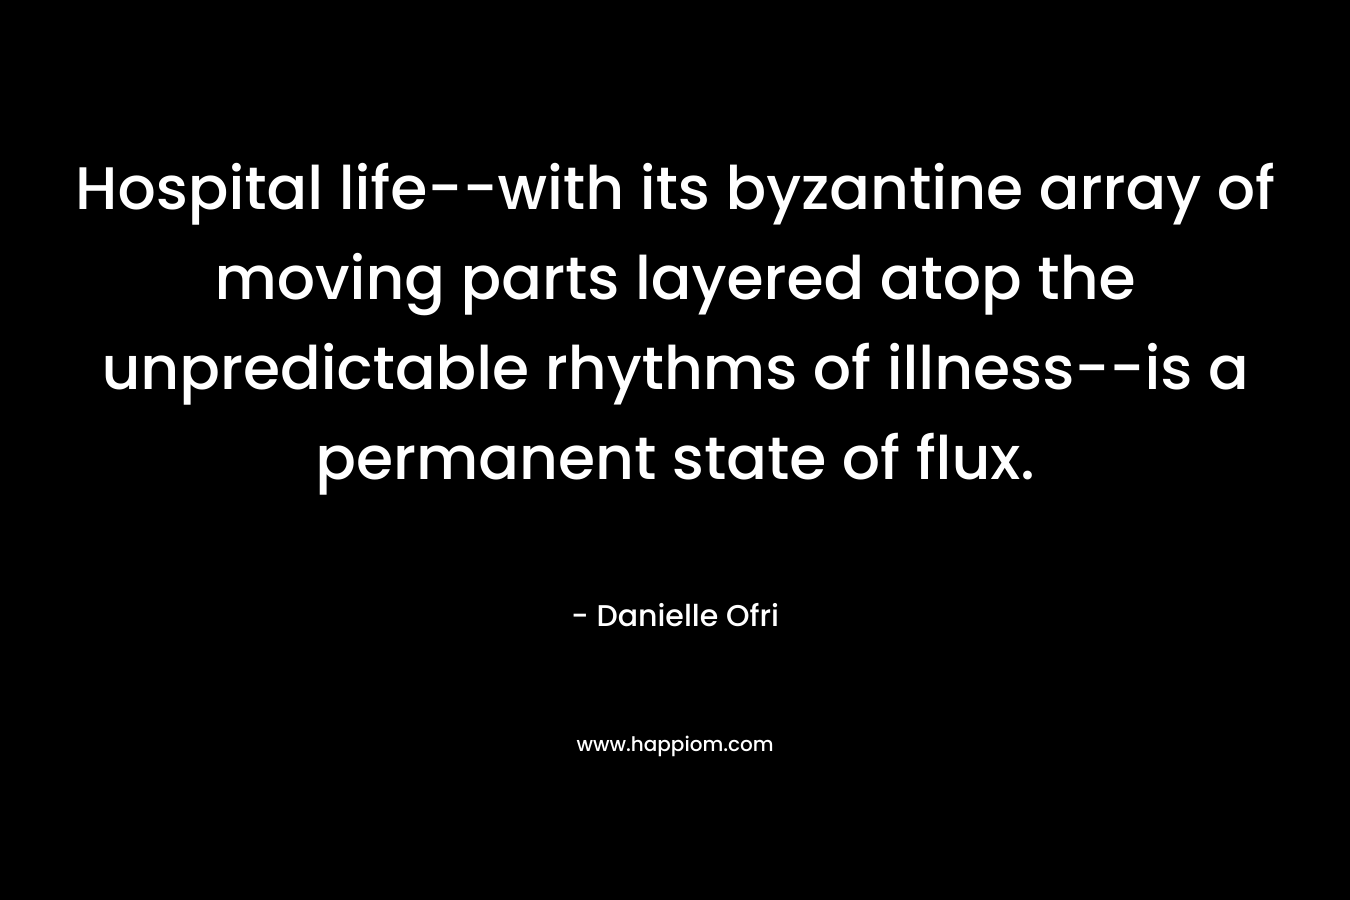 Hospital life–with its byzantine array of moving parts layered atop the unpredictable rhythms of illness–is a permanent state of flux. – Danielle Ofri